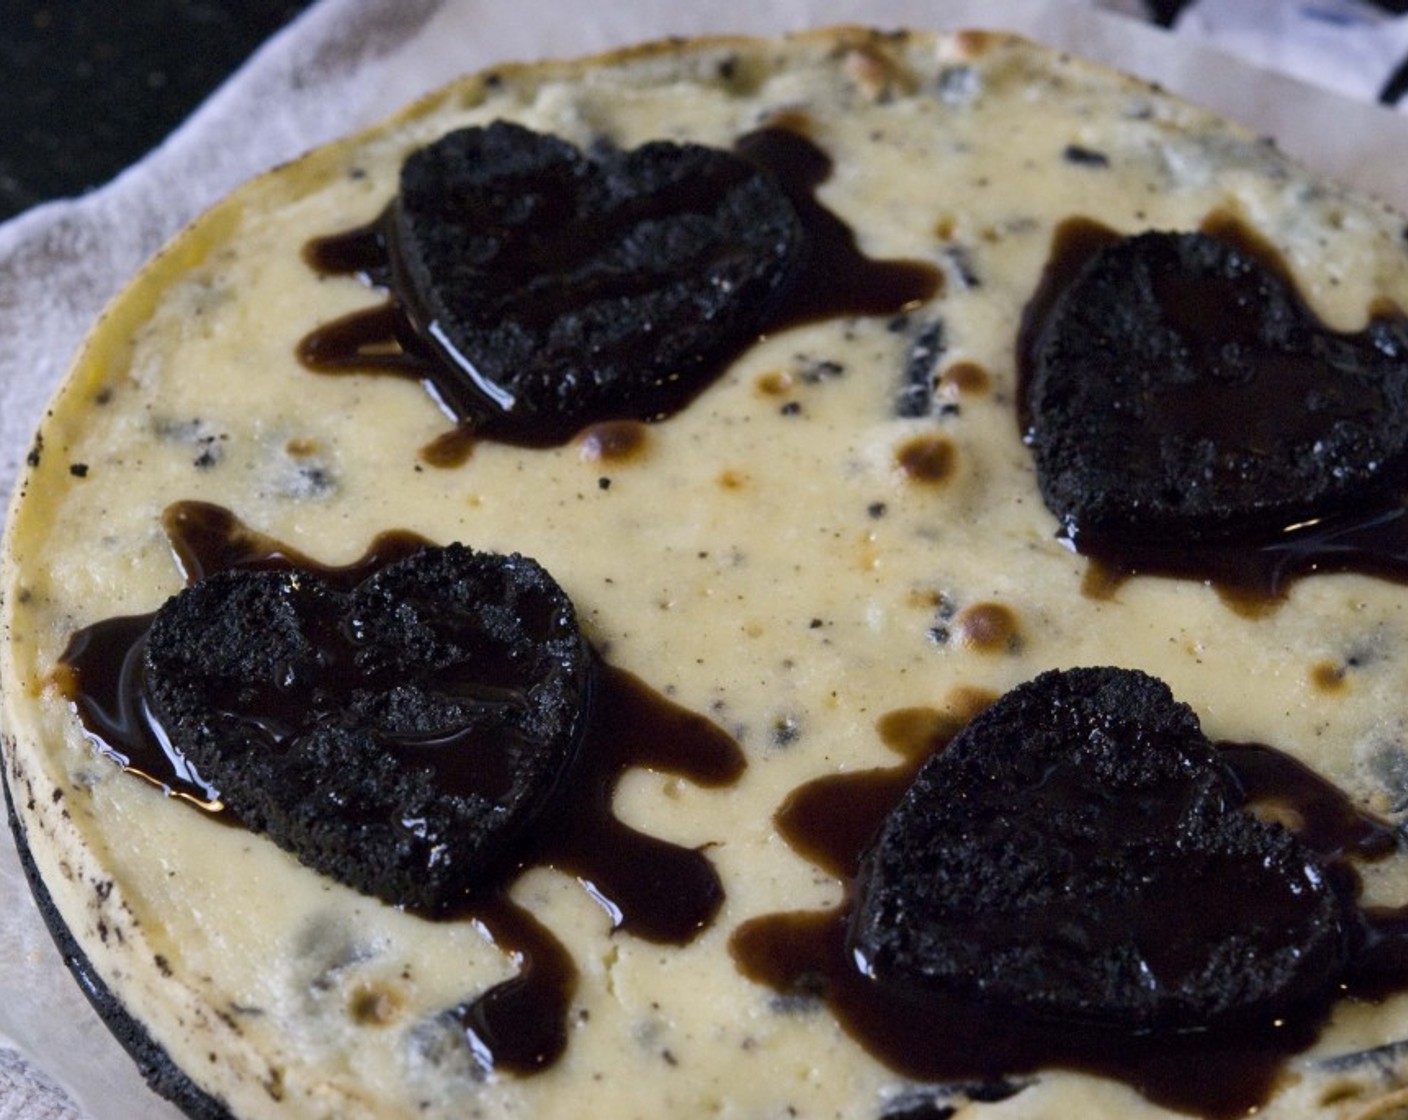 step 14 Right before serving, decorate with some Chocolate Syrup (to taste) drizzled on top of the hearts. Enjoy!